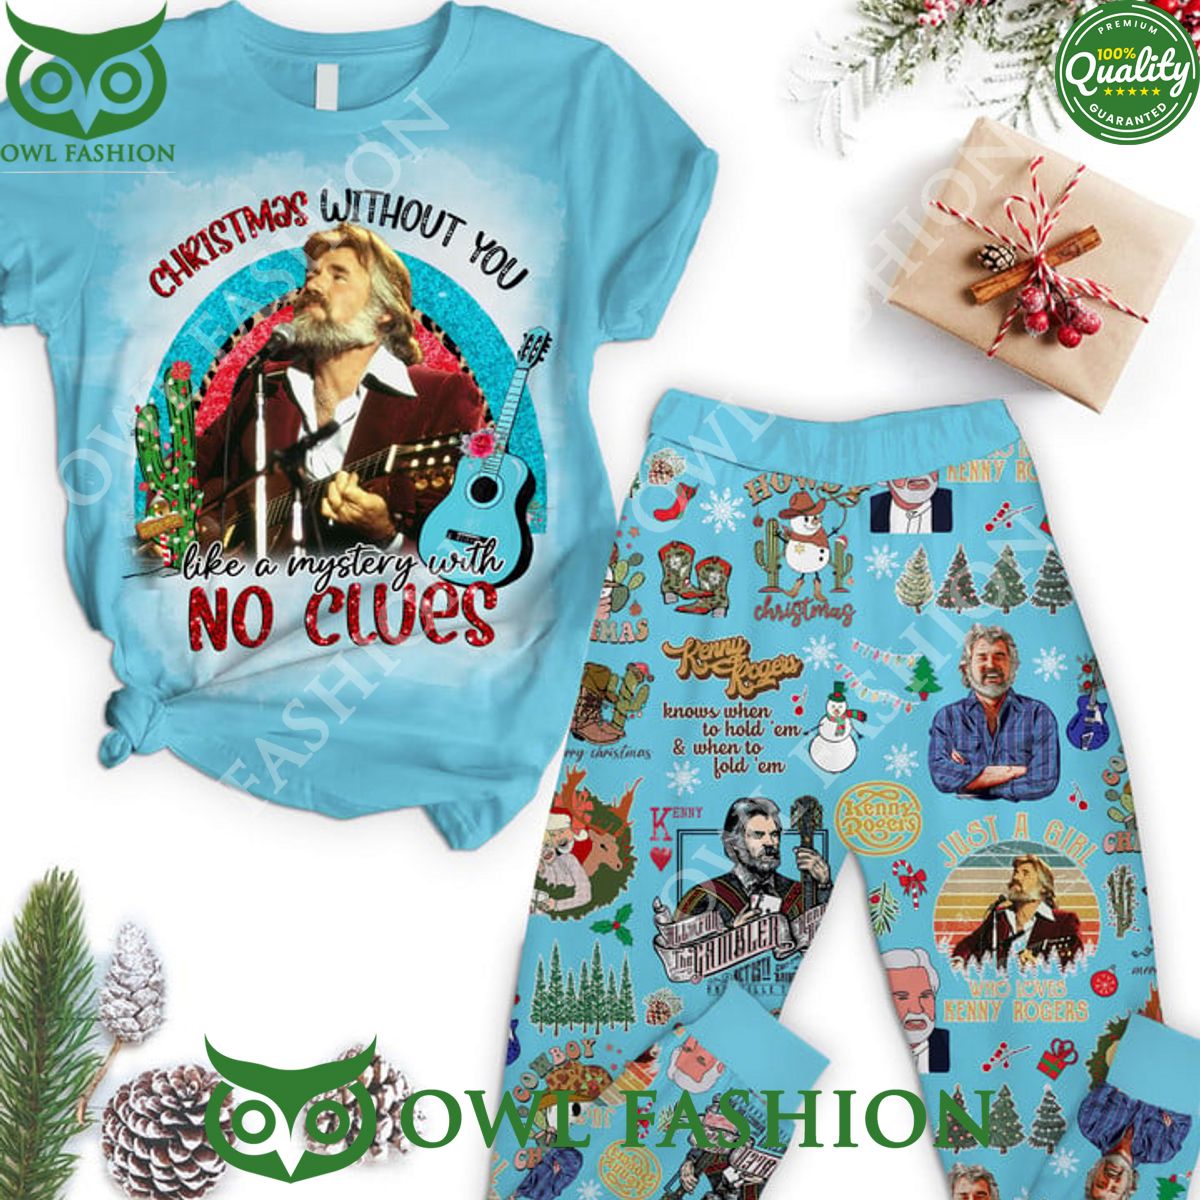 Christmas without Kenny Rogers Mystery No clues Pajamas Set Rocking picture